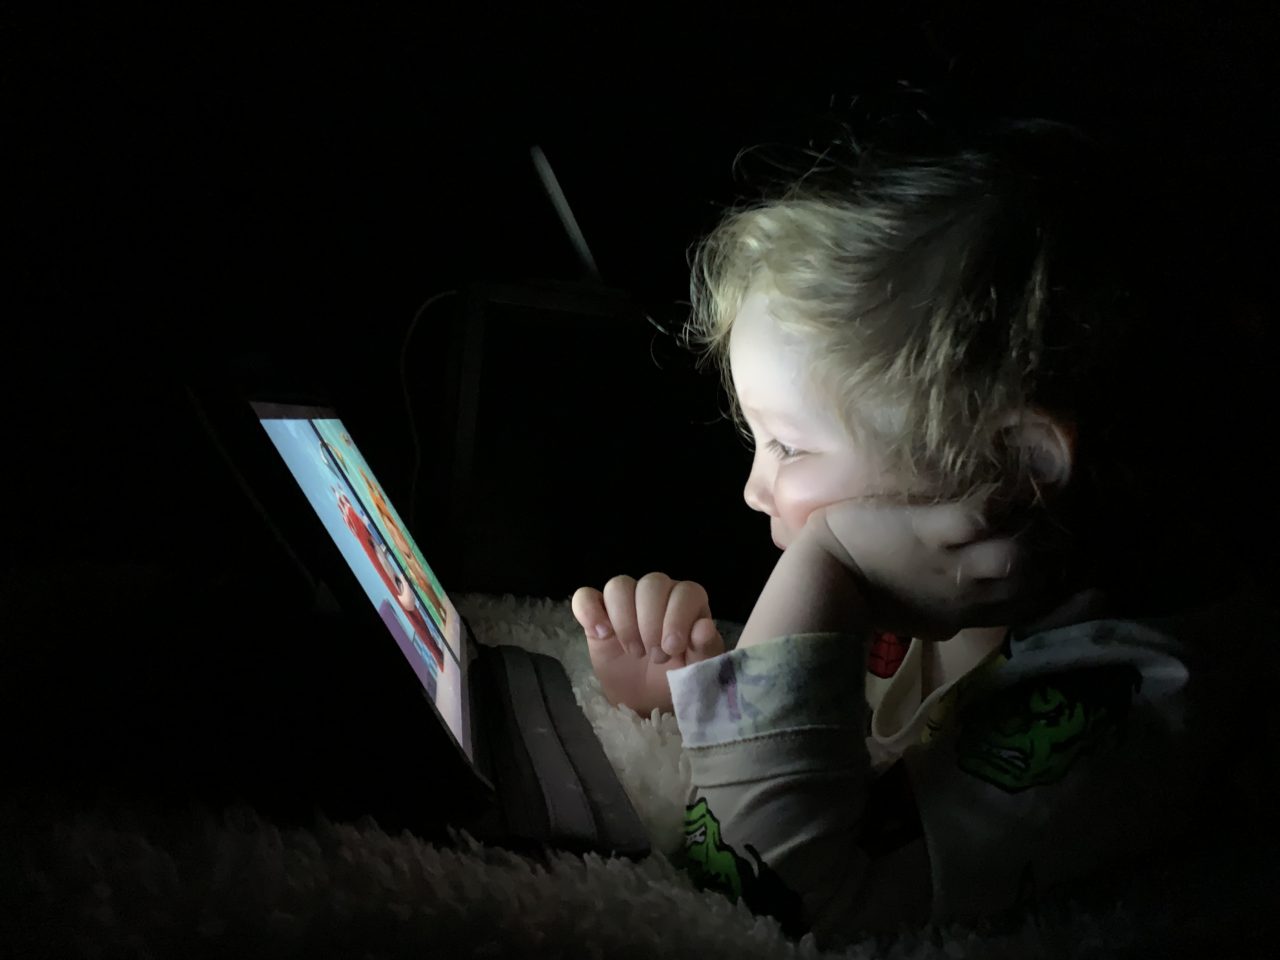 Kid Watching A Netflix Show On A Tablet In The Dark